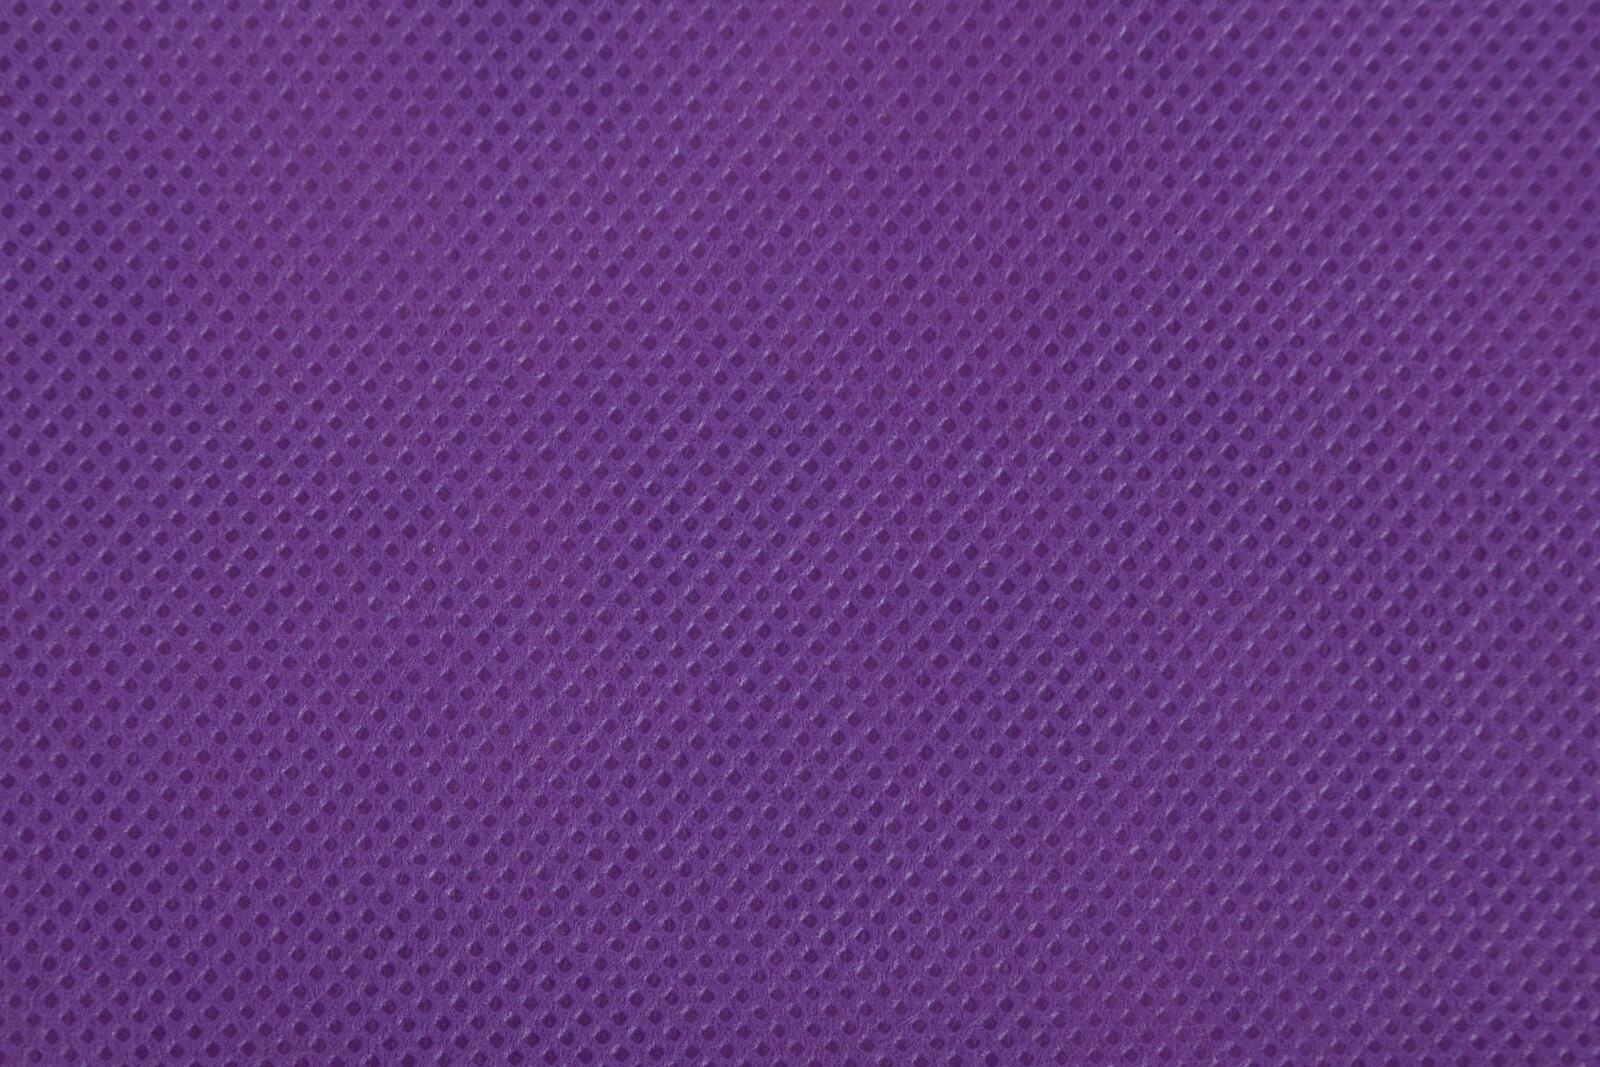 Wallpapers texture violet material on the desktop